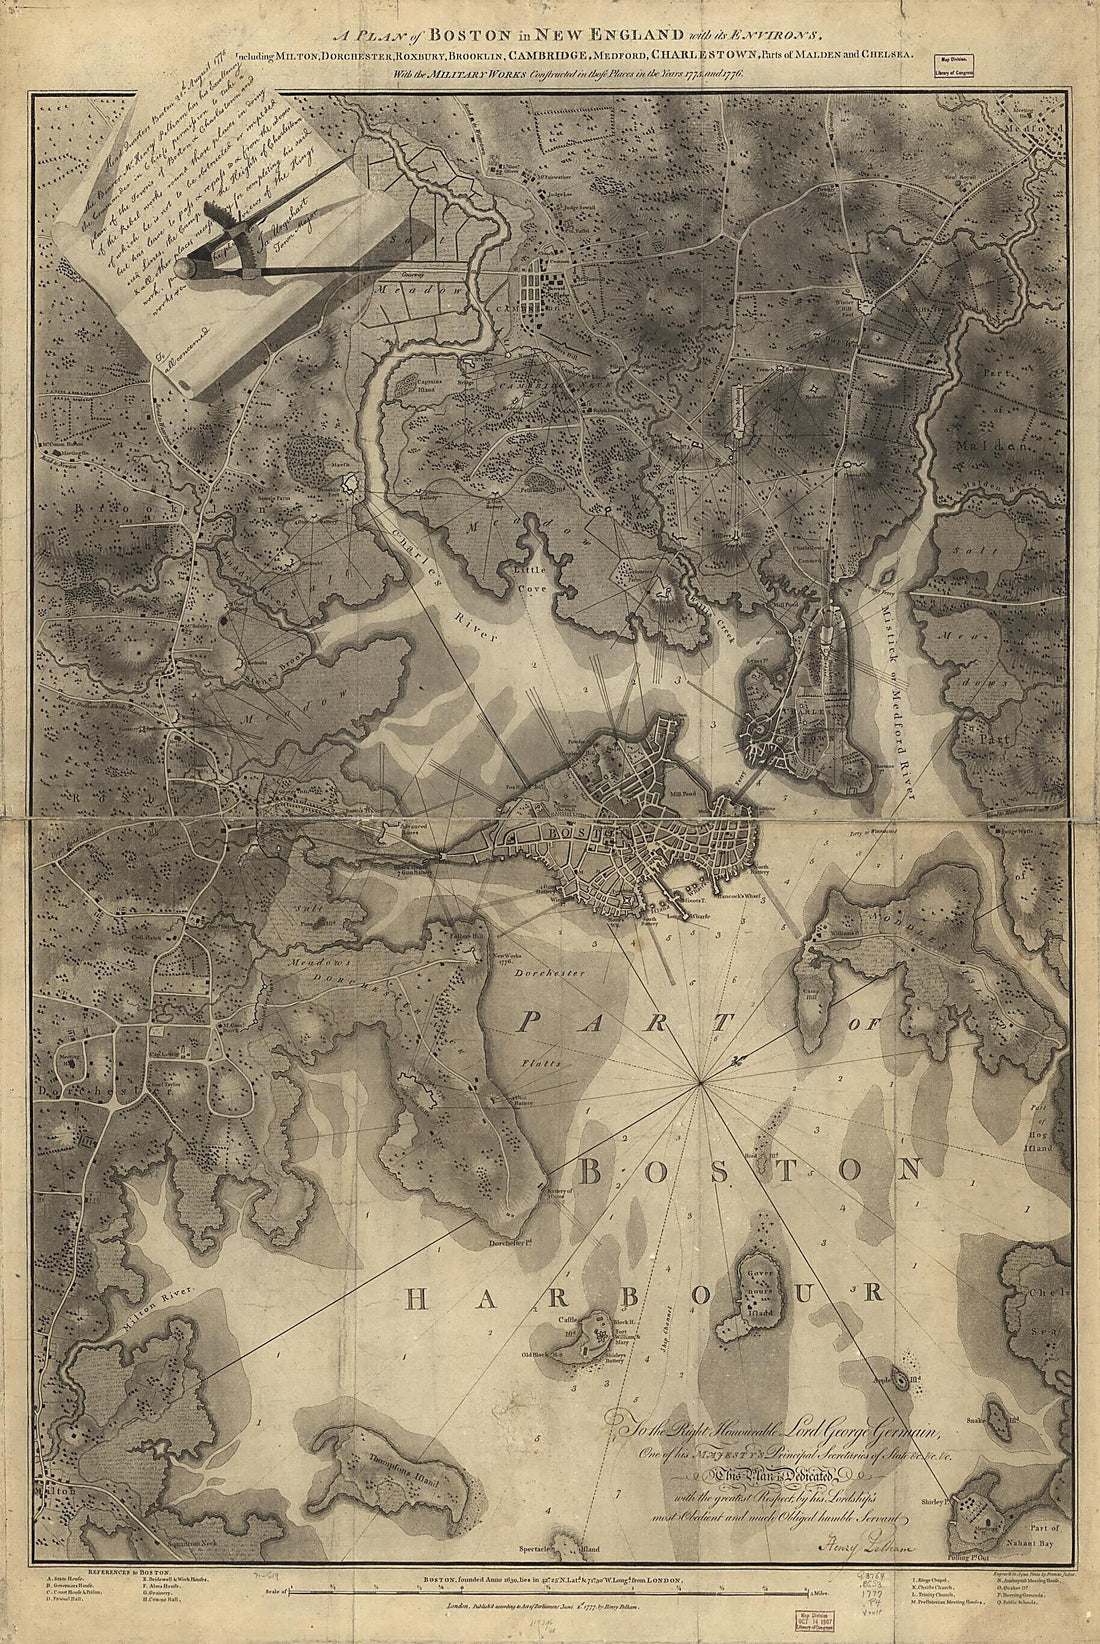 This old map of A Plan of Boston In New England With Its Environs, Including Milton, Dorchester, Roxbury, Brooklin, Cambridge, Medford, Charlestown, Parts of Malden and Chelsea With the Military Works Constructed In Those Places In the Years 1775 and 177